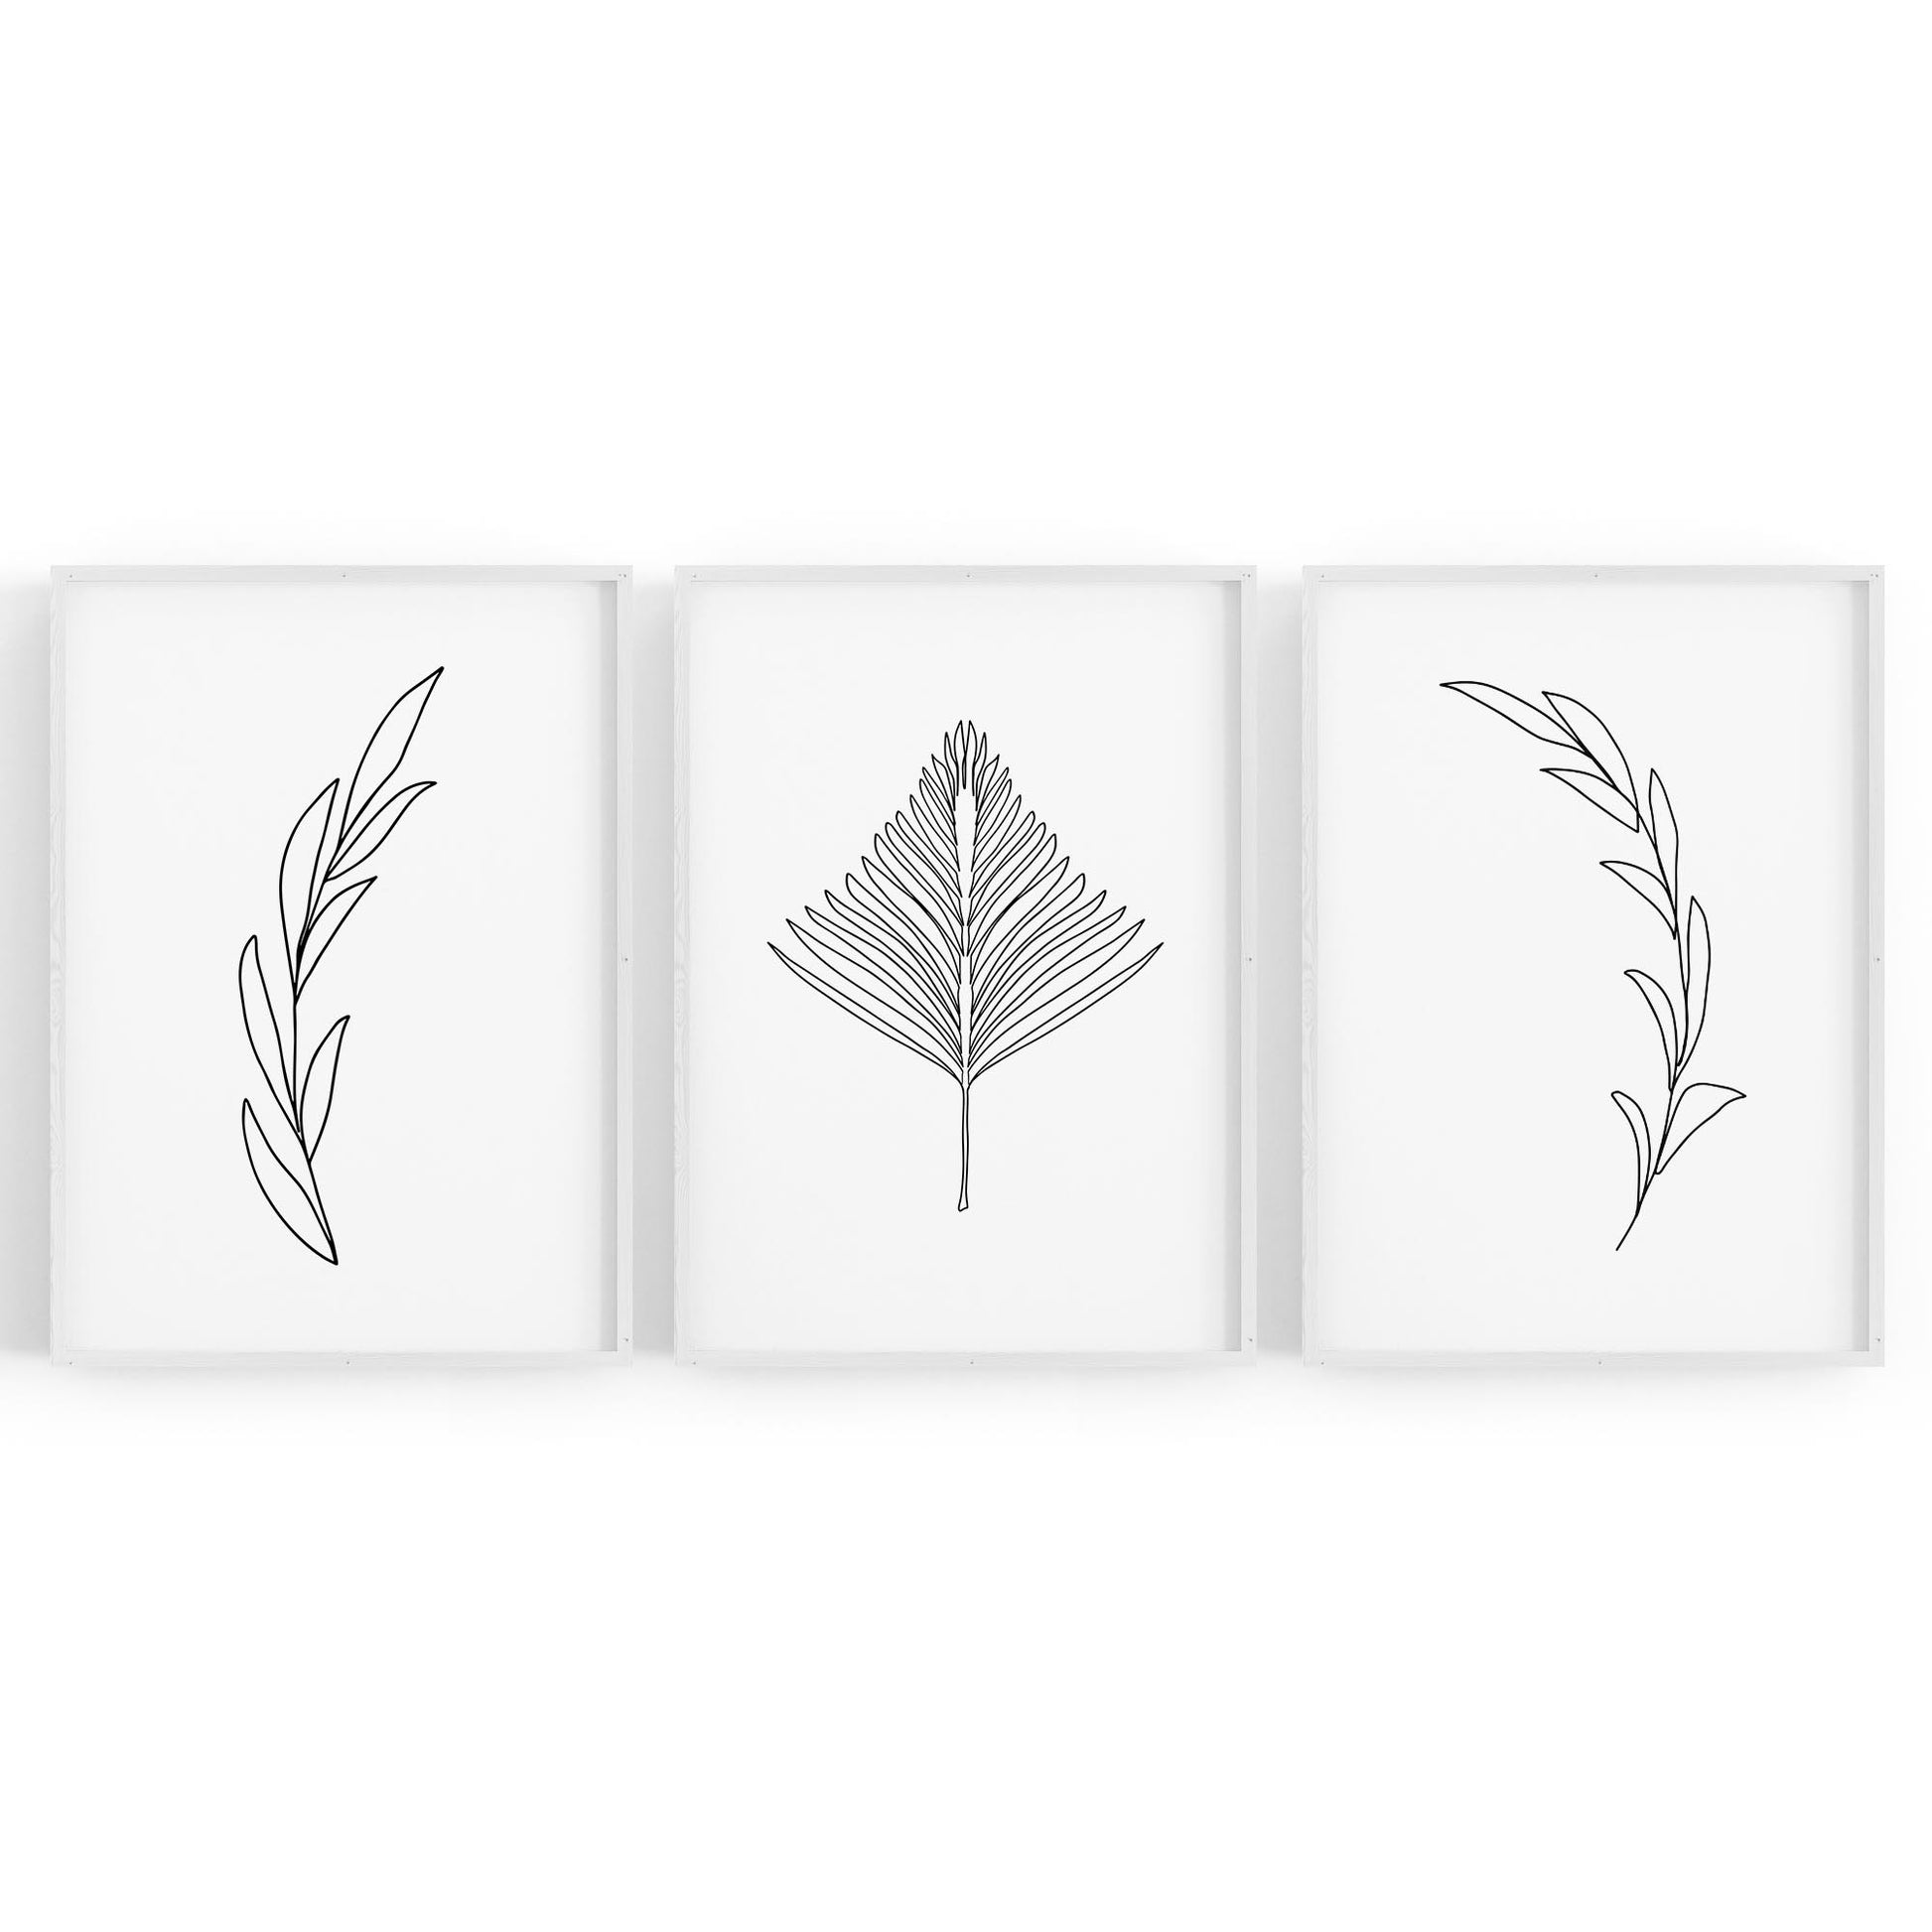 Set of Minimal Plant Line Drawings Wall Art #1 - The Affordable Art Company